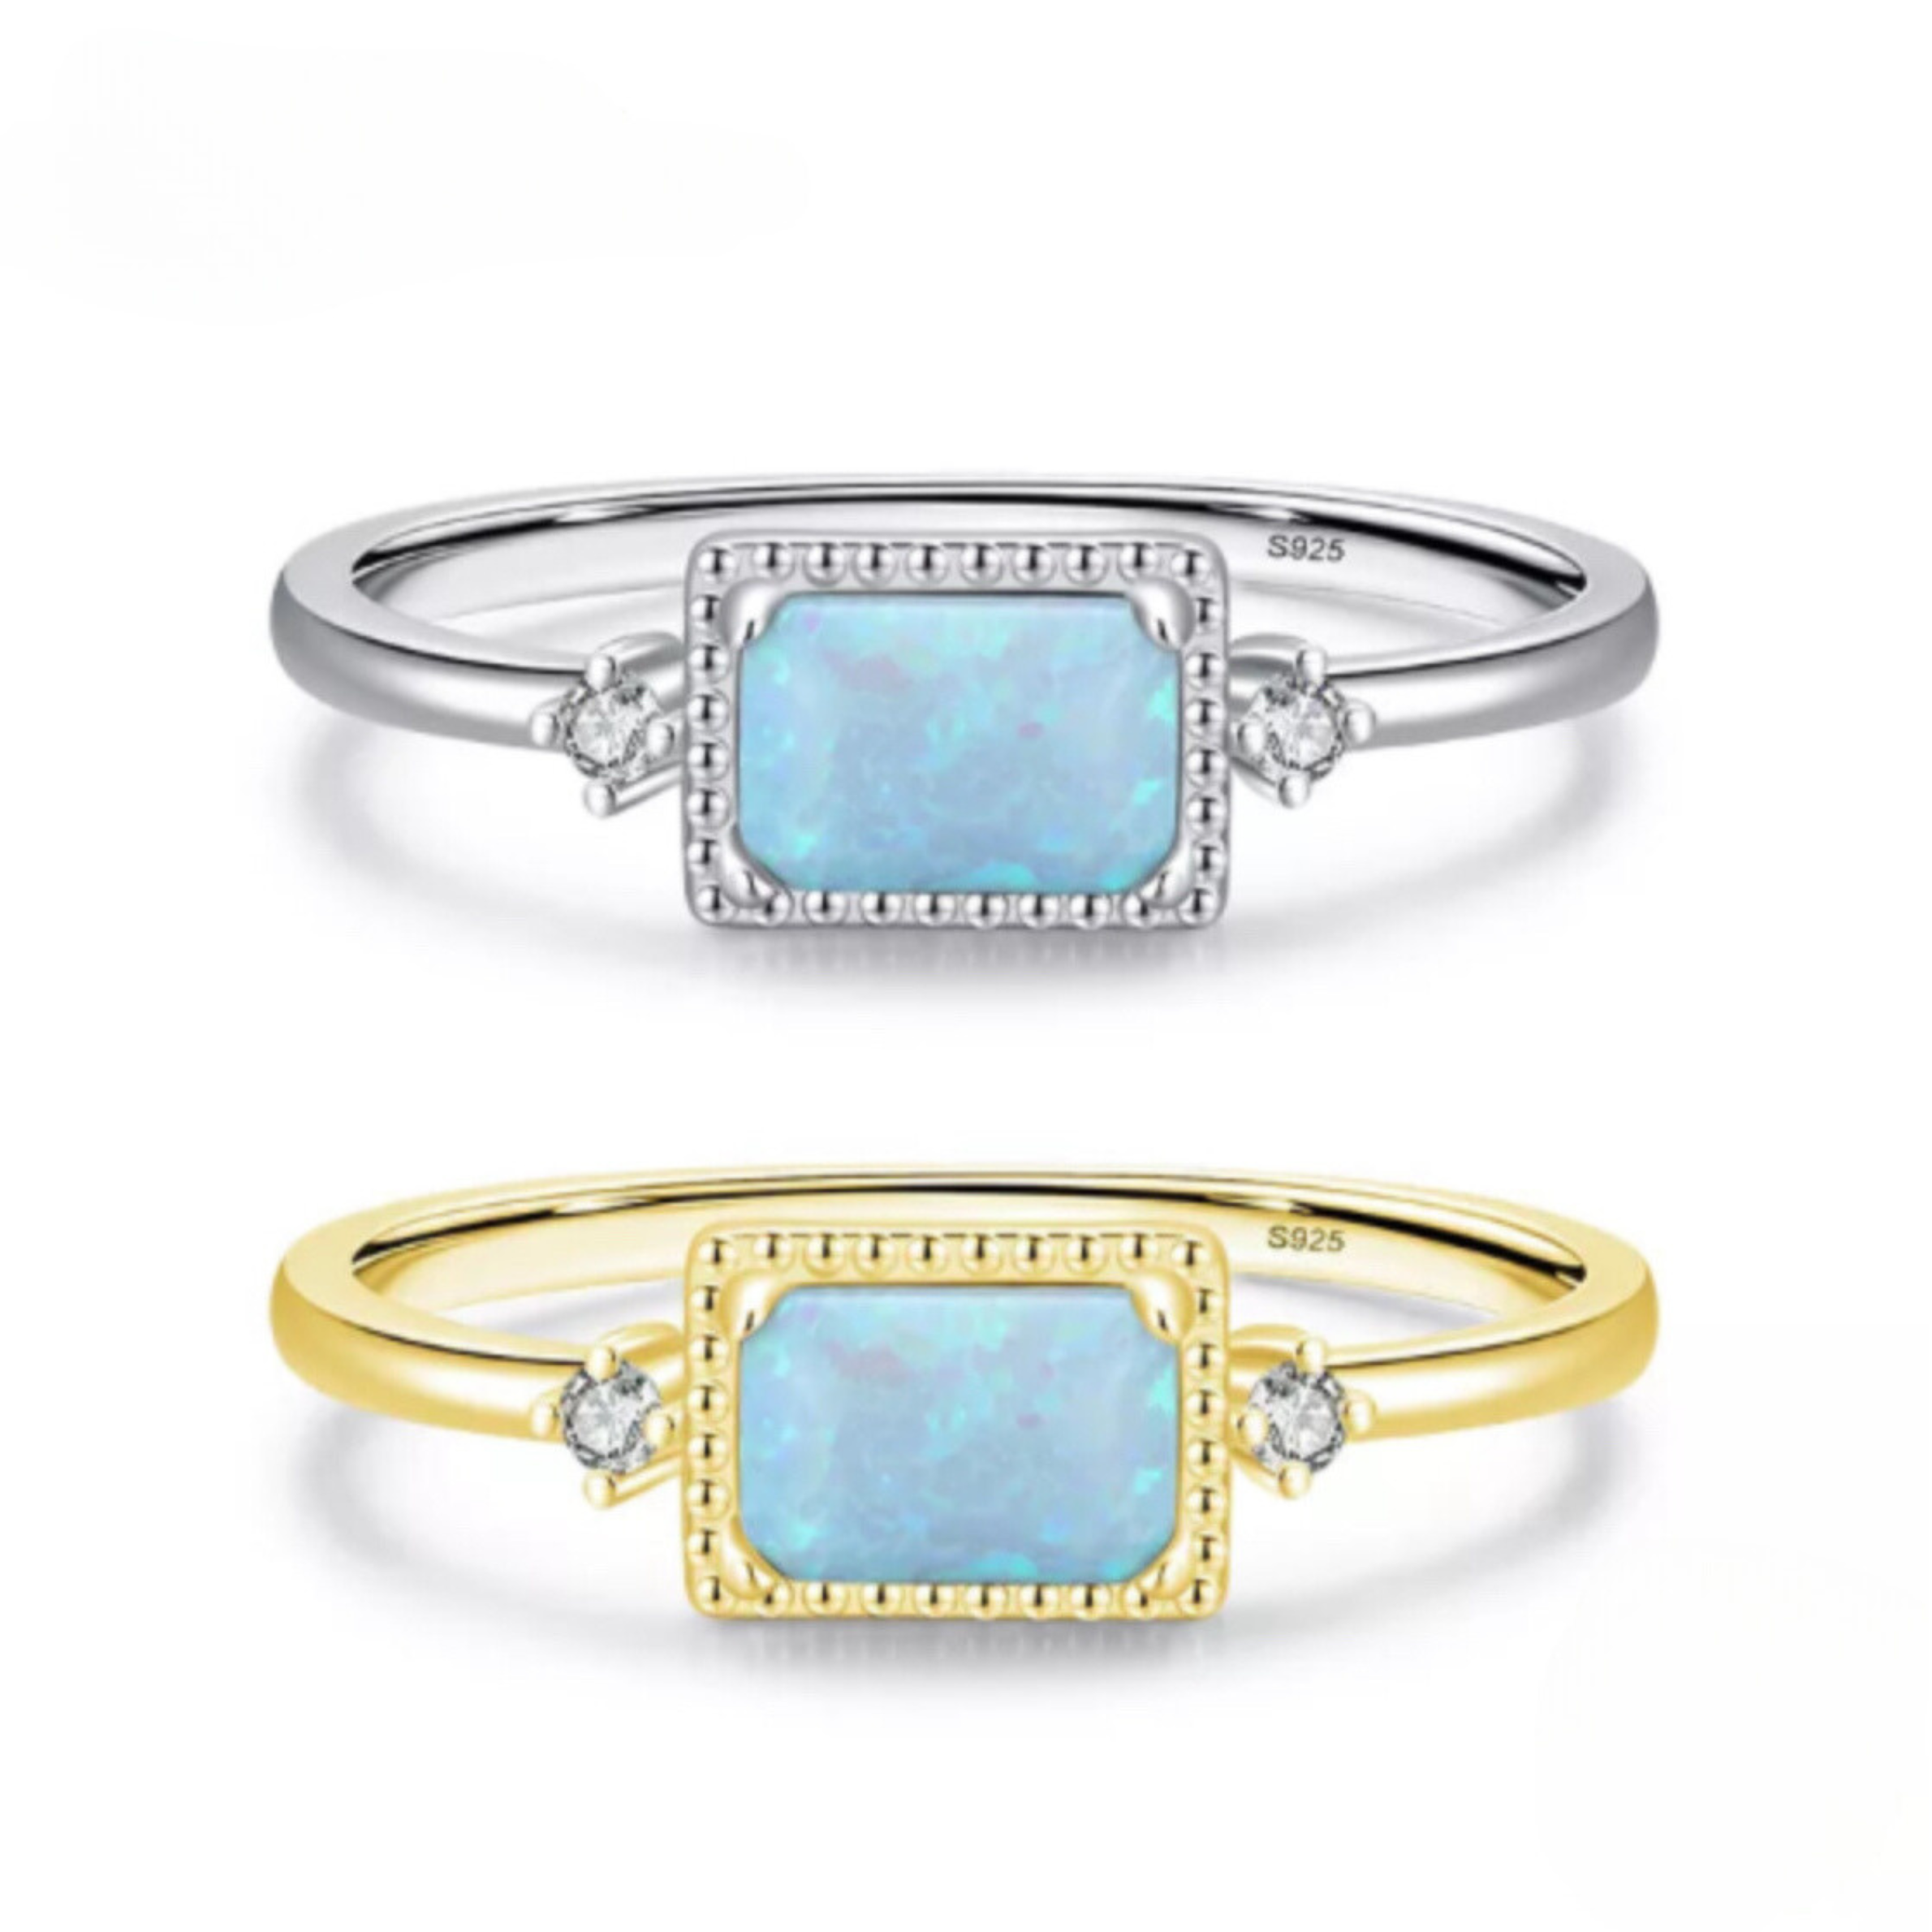 Dainty Opal Sterling Silver Rectangular Ring: Stunning Classic Beauty